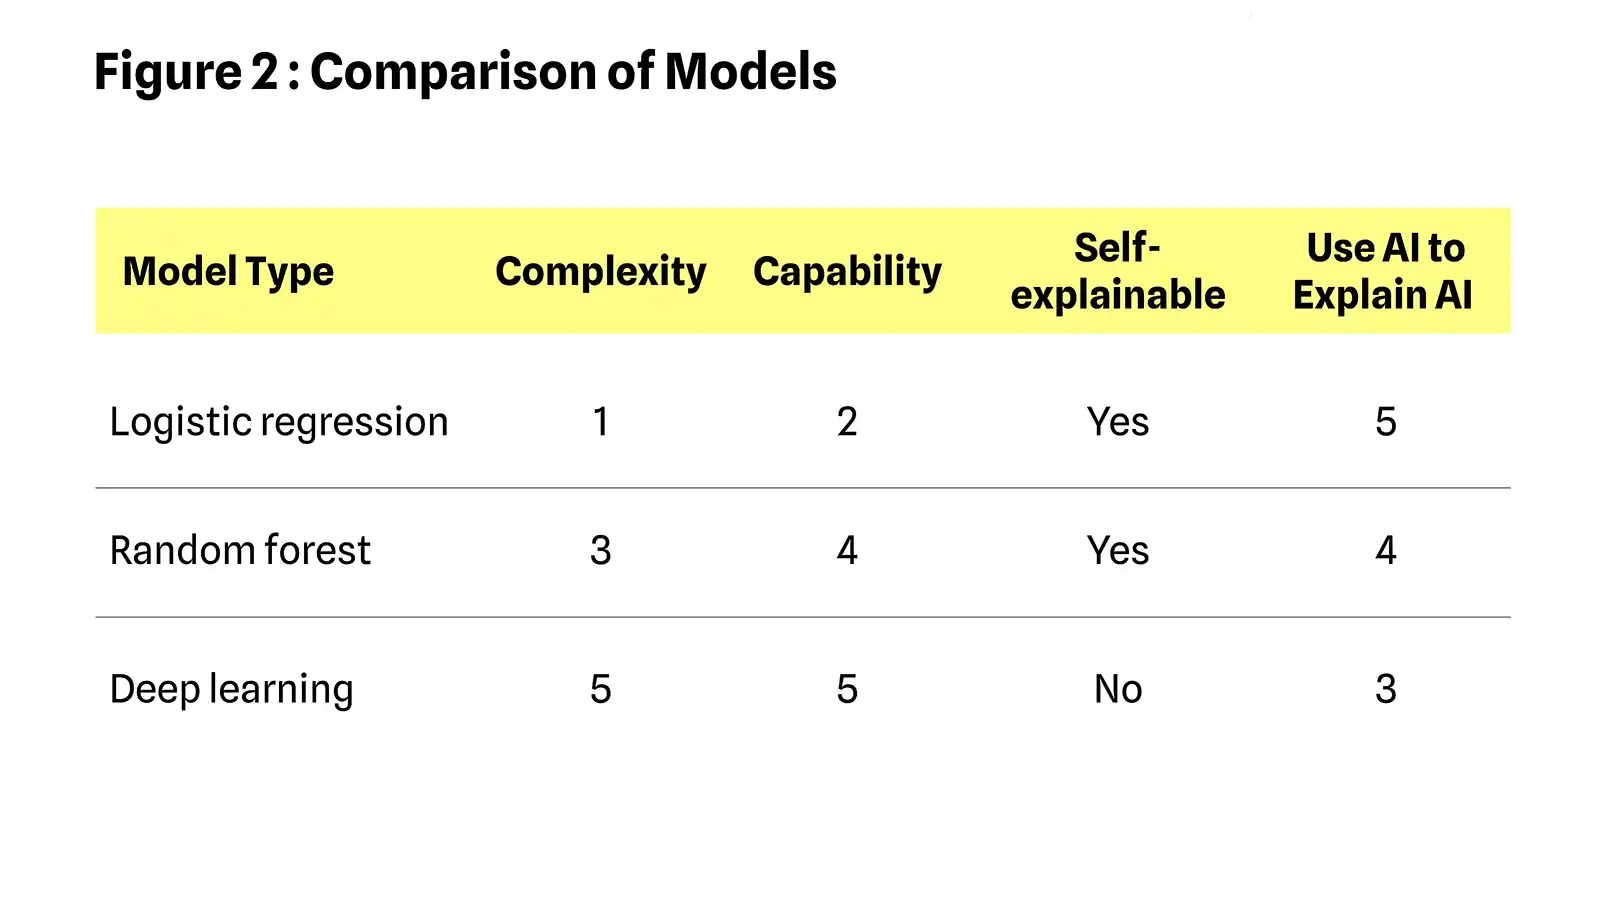 Table comparing the different models